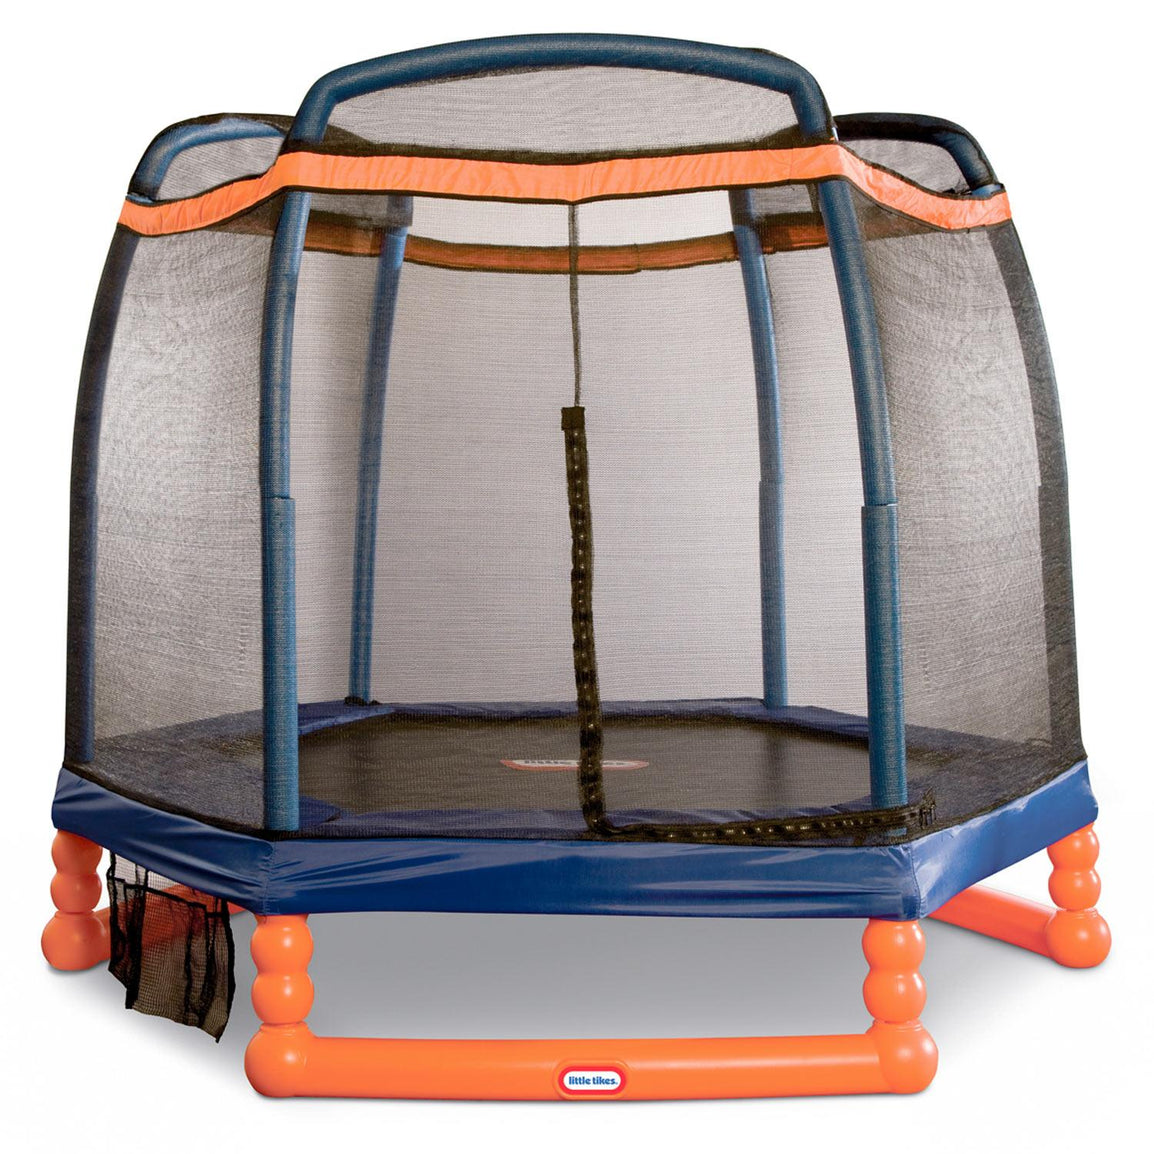 Trampoline For Kids Net Enclosure Mini Indoor Outdoor Small Child Safe  Springs